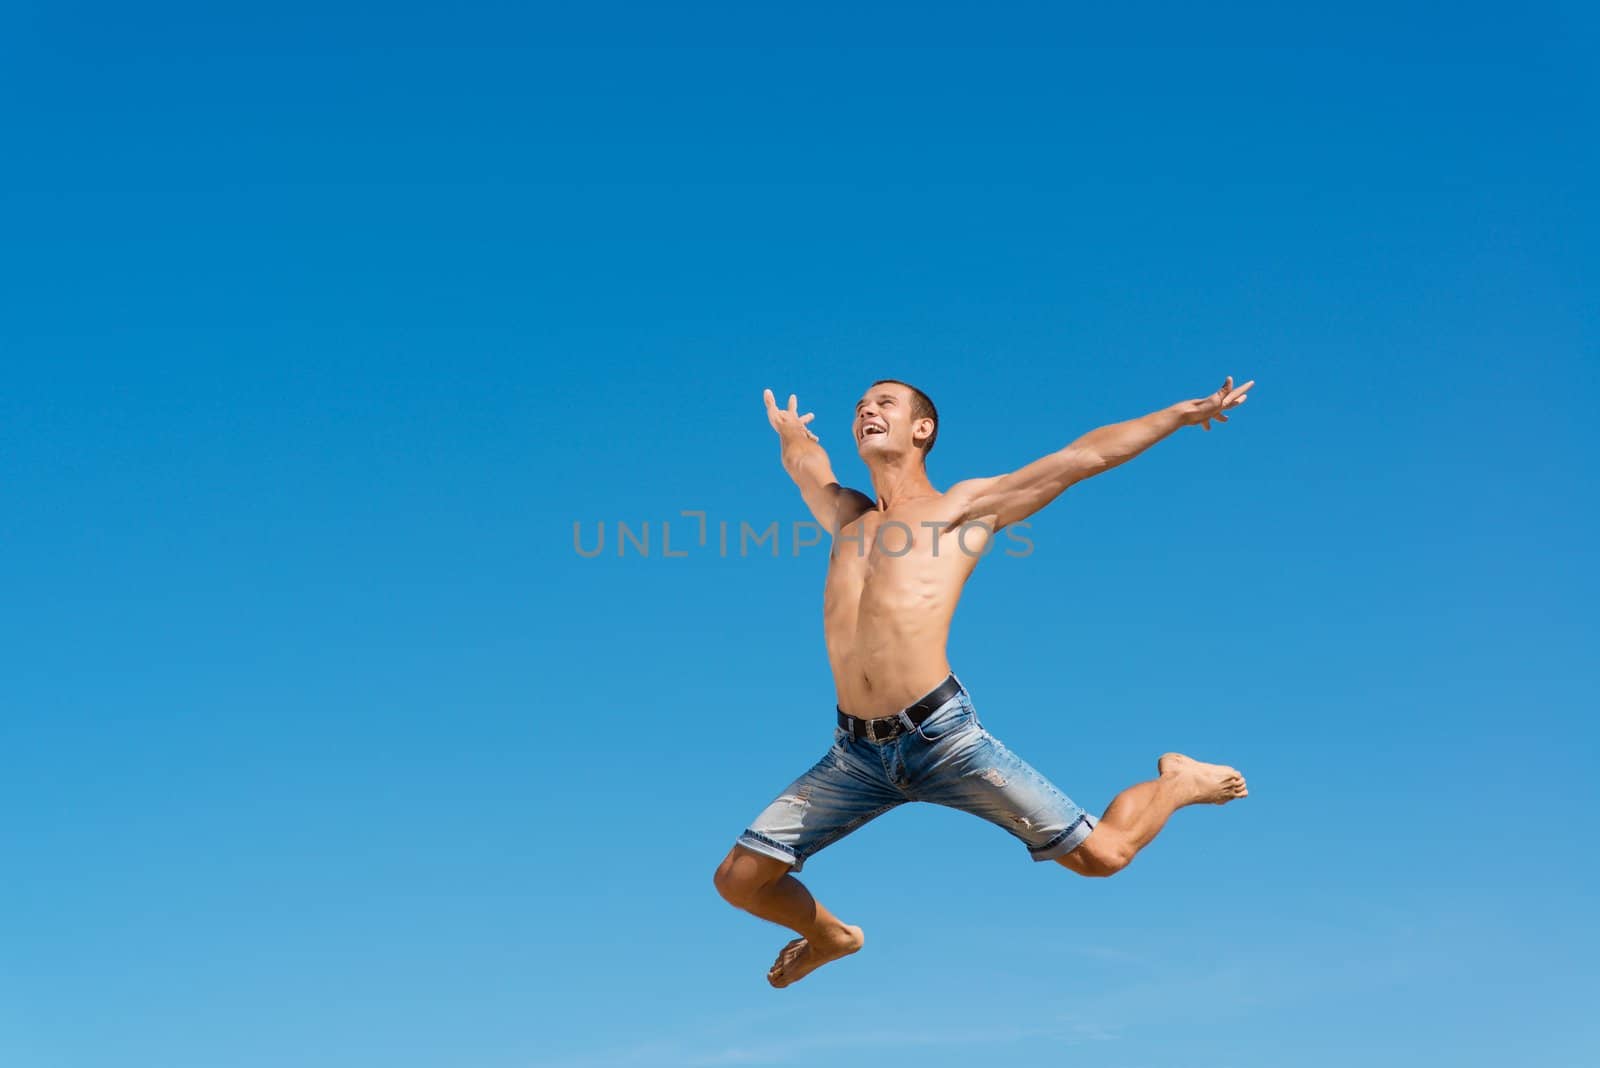 man jumping on the blue sky background, a good time